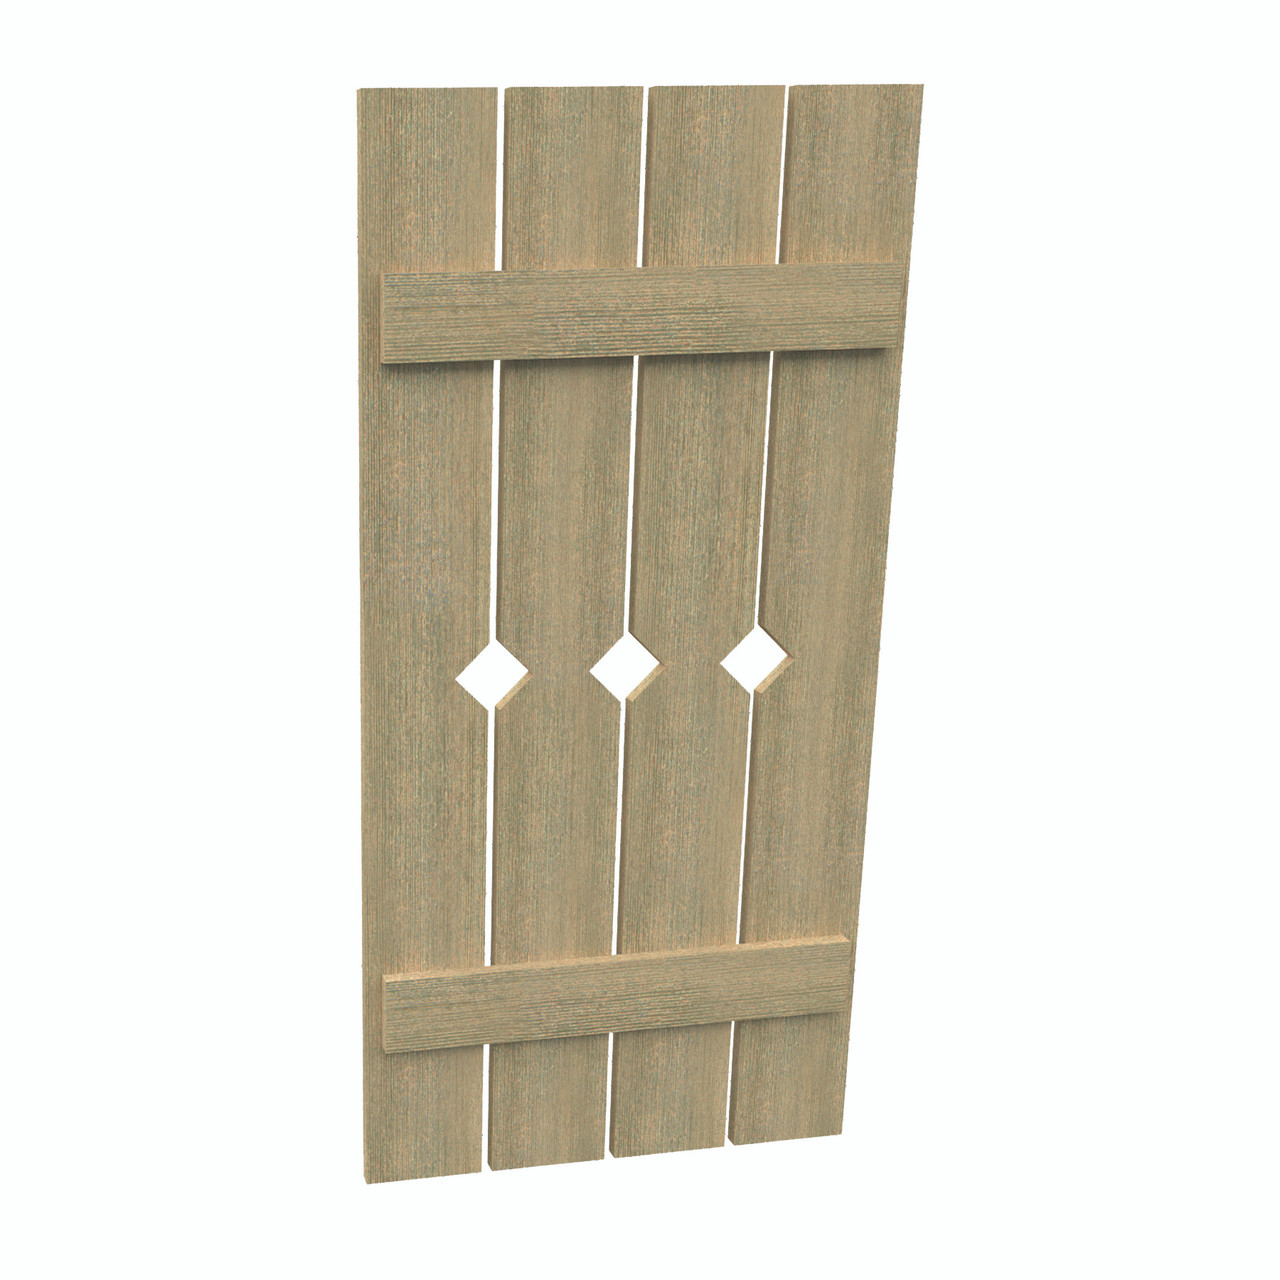 24 inch by 118 inch Plank Shutter with 4-Plank, Diamond